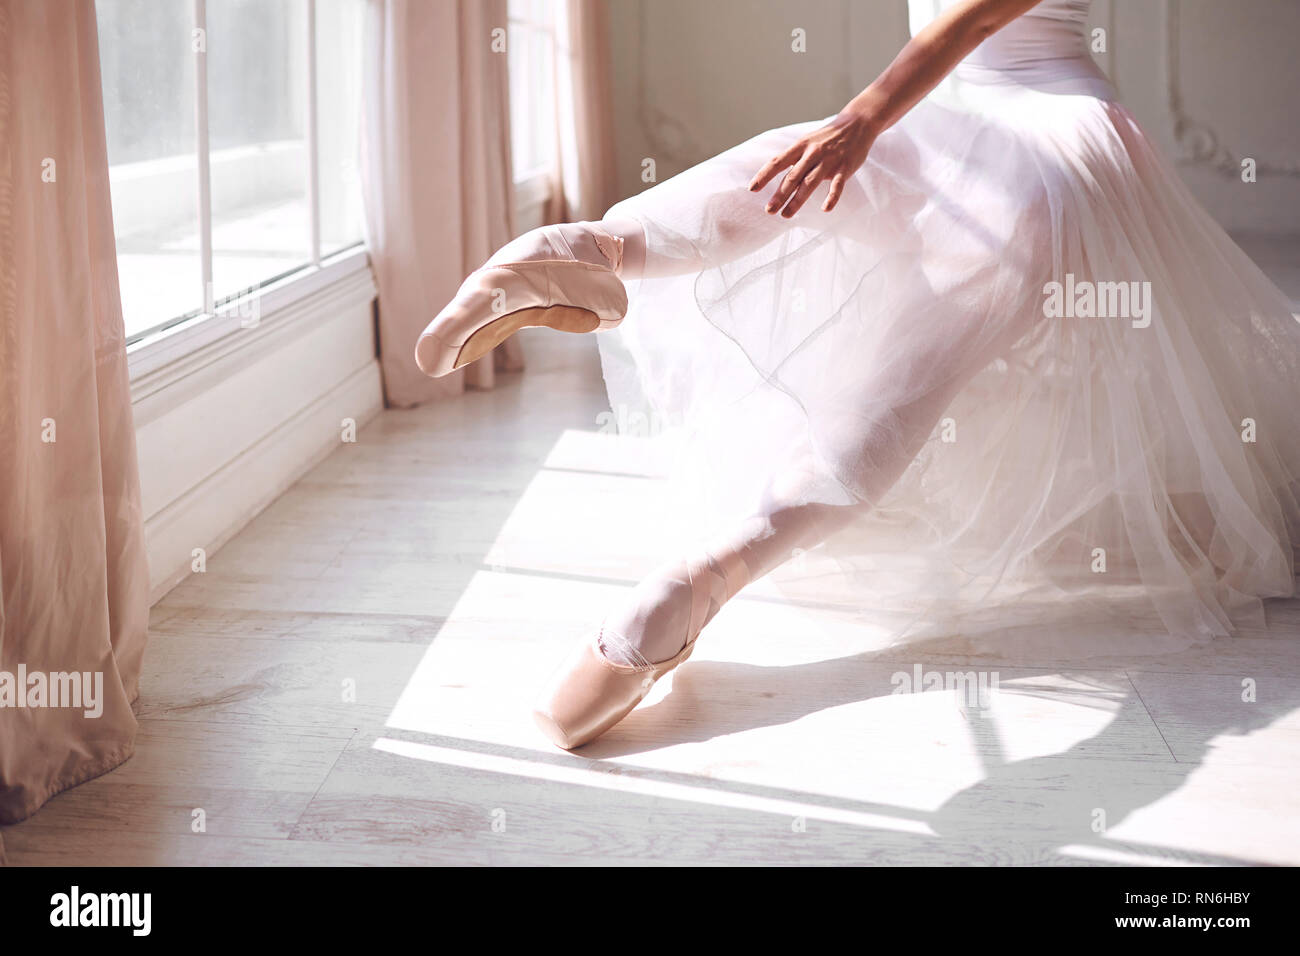 Pointe shoes on the feet of a ballerina. Stock Photo